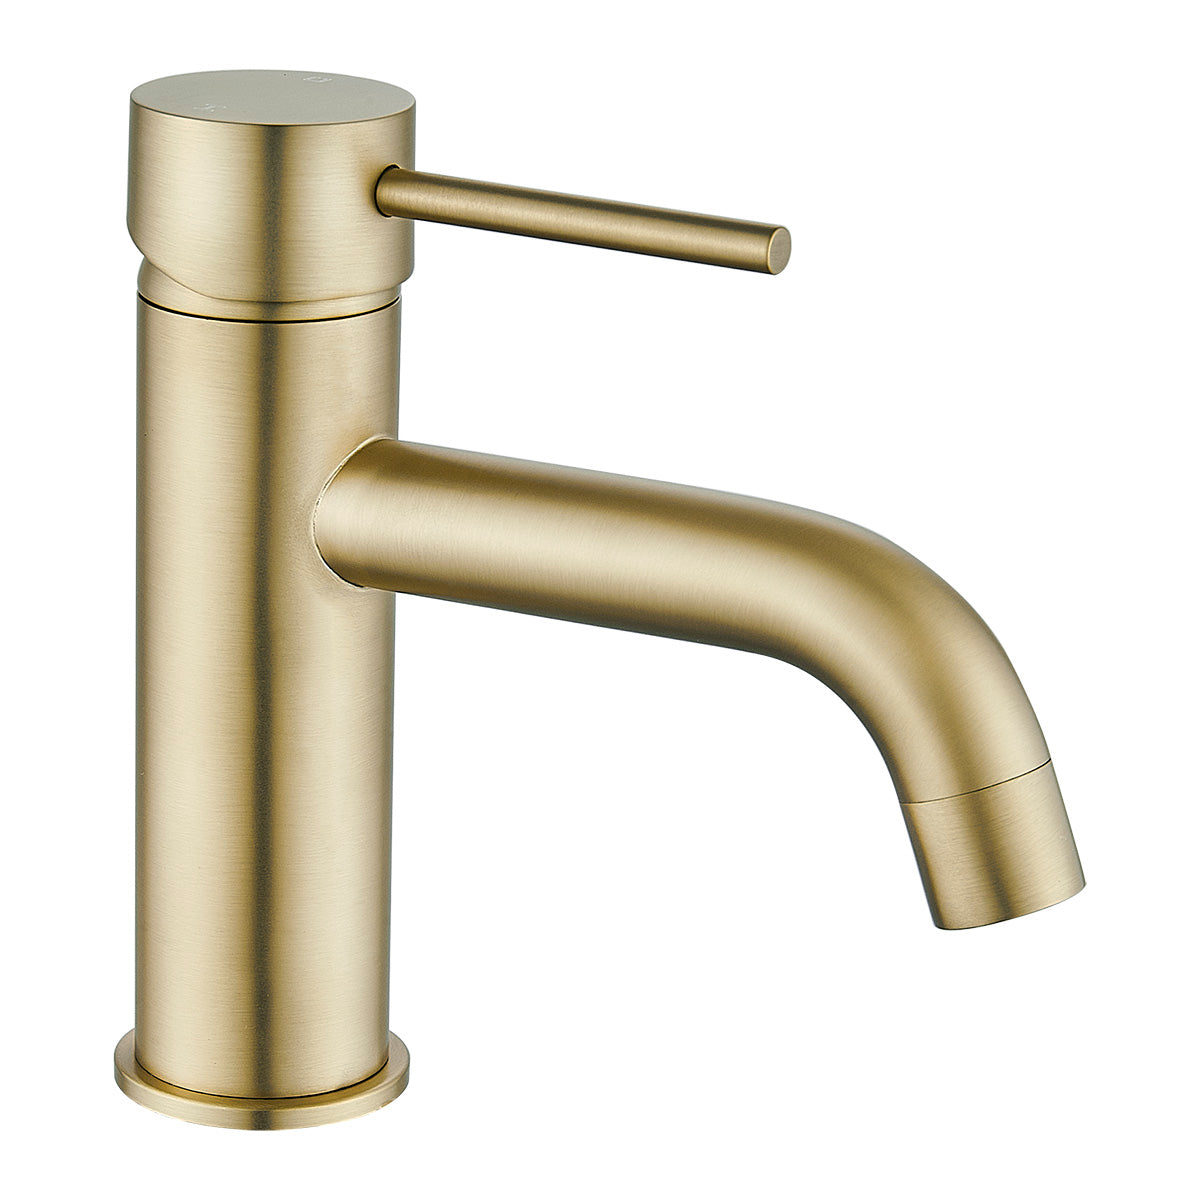 HELLYCAR IDEAL BASIN MIXER 164MM BRUSHED GOLD